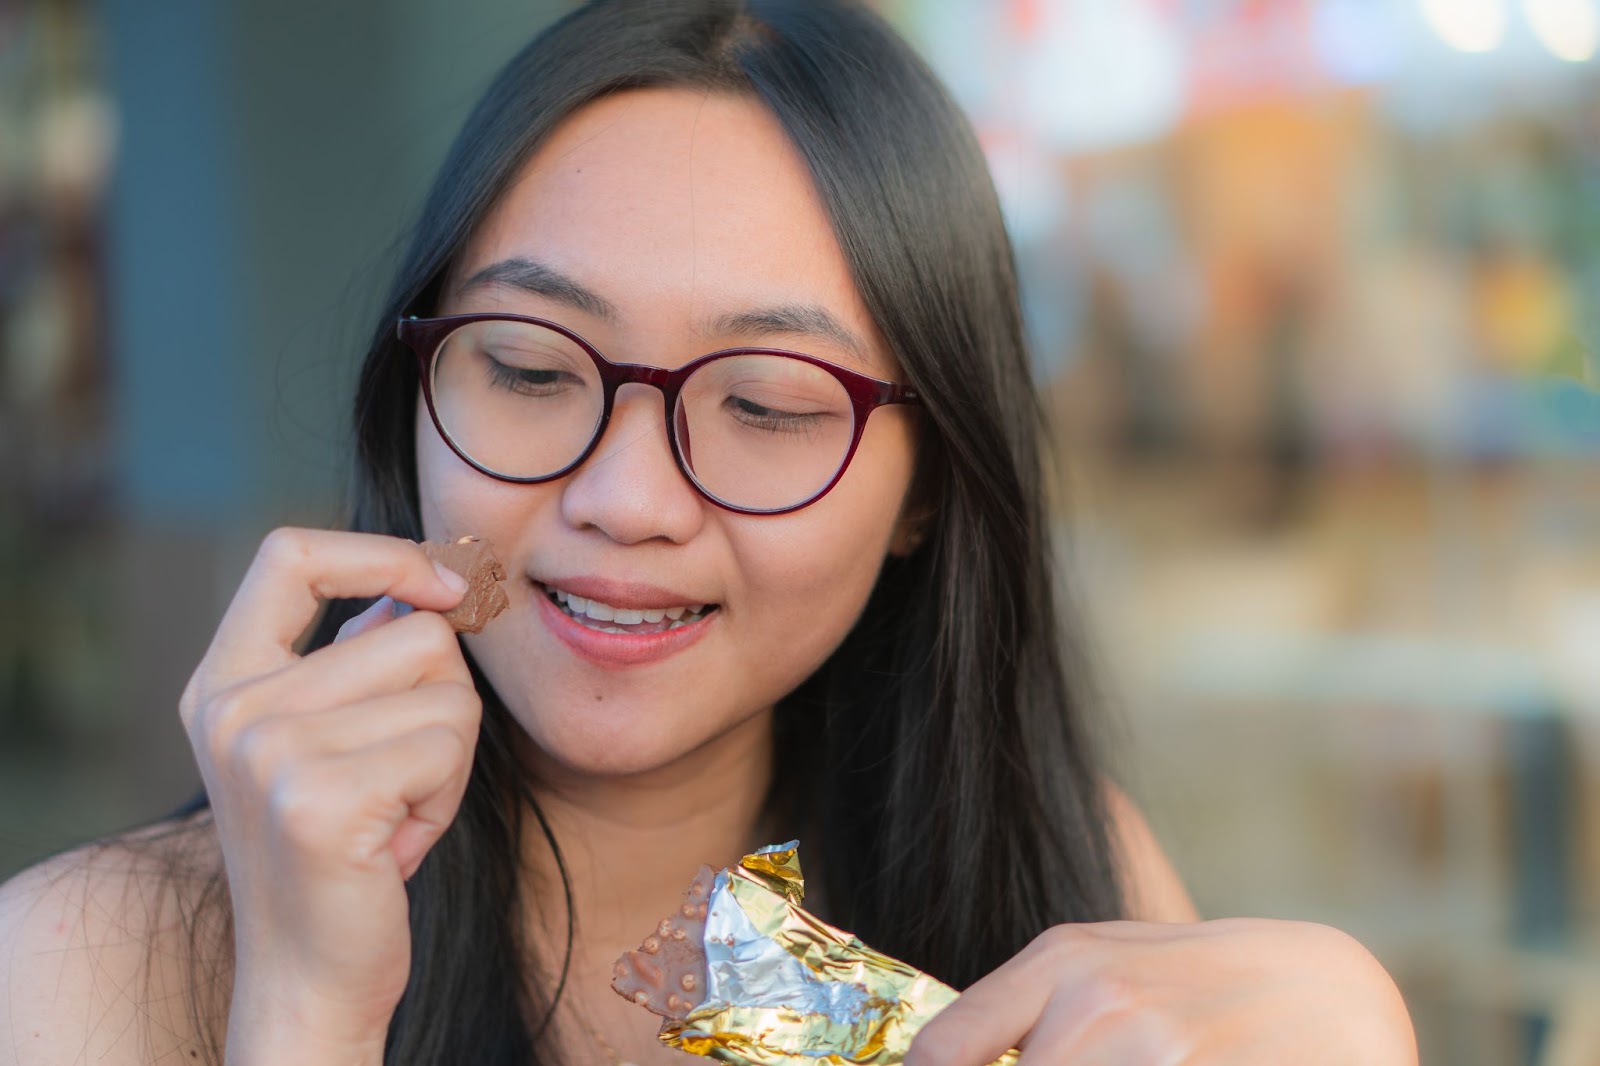 Girl with glasses eating a chocolate bar in a wrapper.